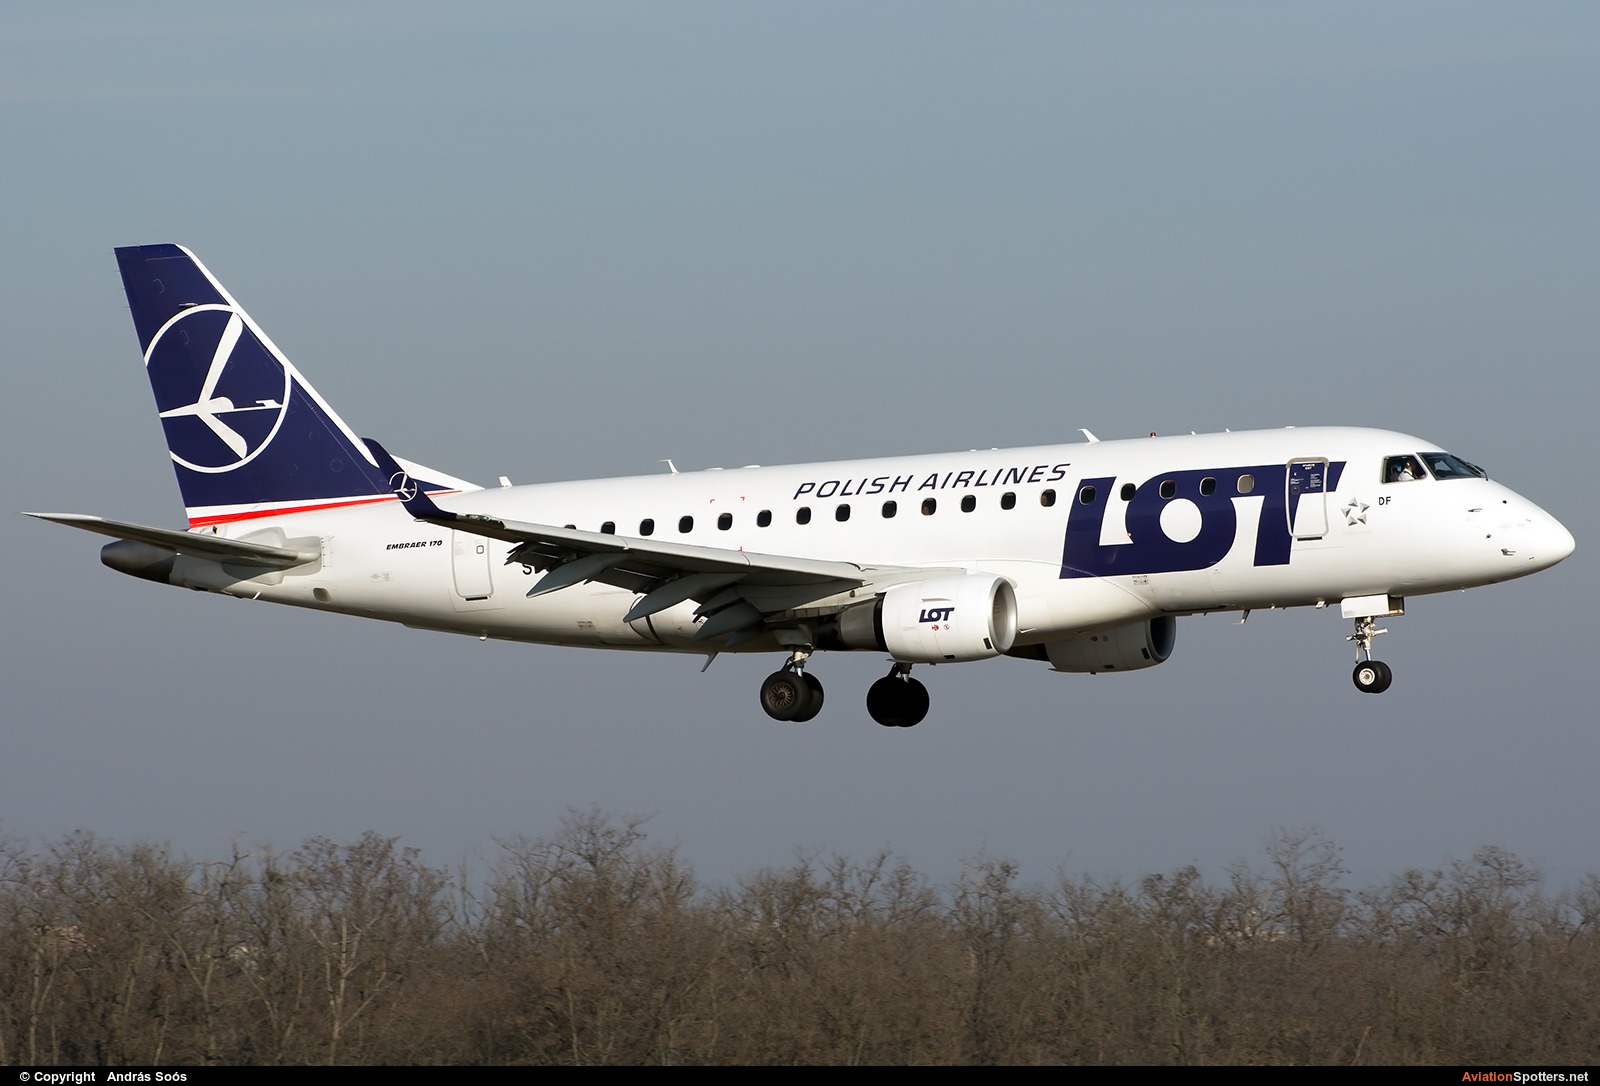 LOT - Polish Airlines  -  170  (SP-LDF) By András Soós (sas1965)